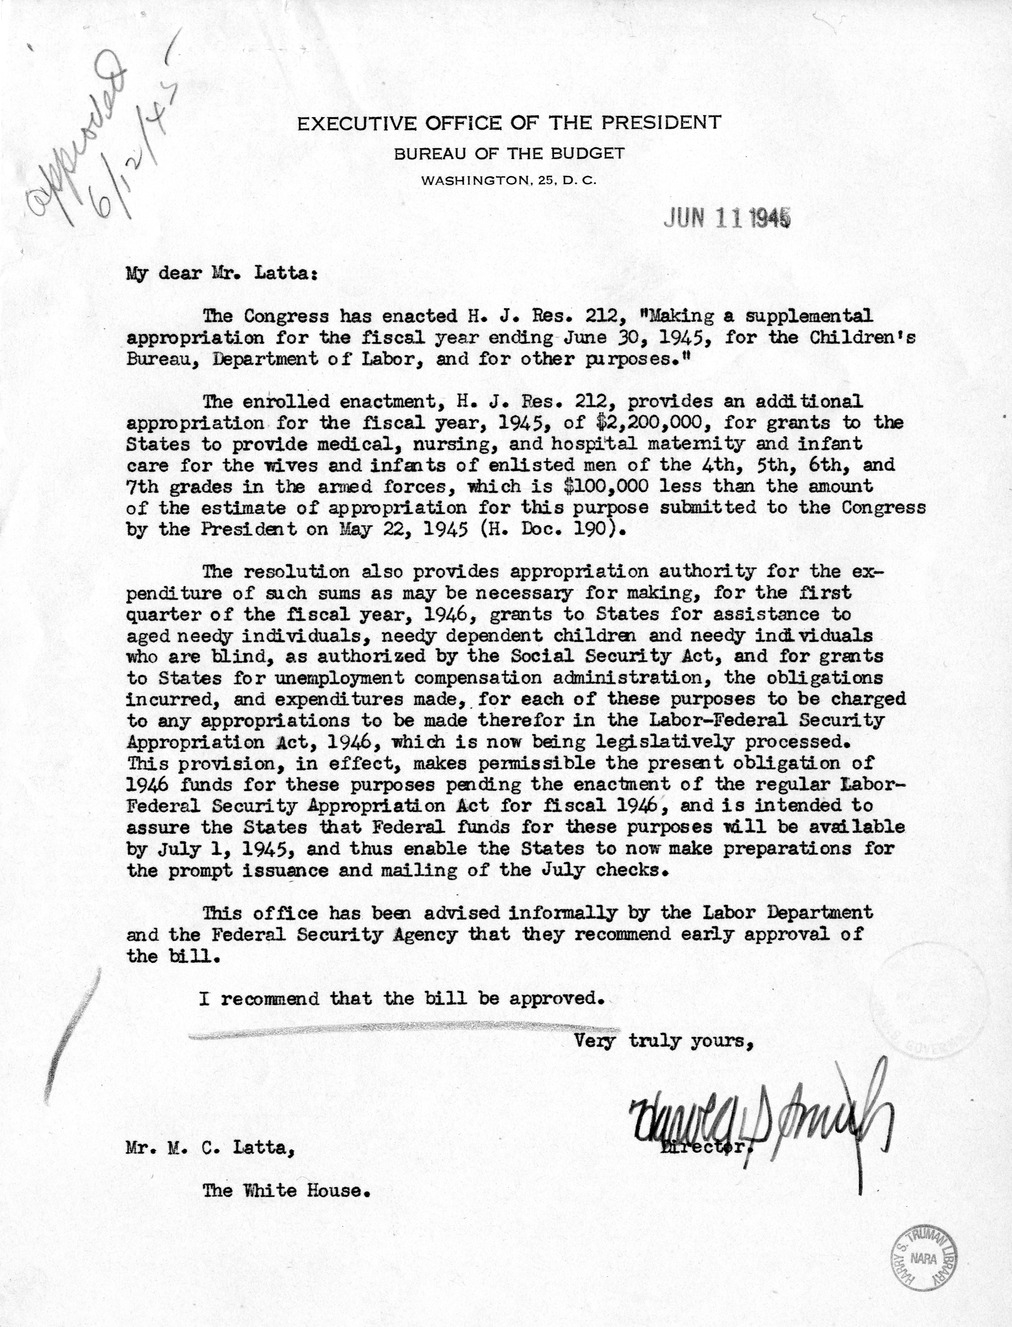 Memorandum from Harold D. Smith to M. C. Latta, H.J. Res. 212, Making a Supplemental Appropriation for the For the Fiscal Year Ending June 30, 1945, for the Children's Bureau, Department of Labor, and for Other Purposes, with Attachments